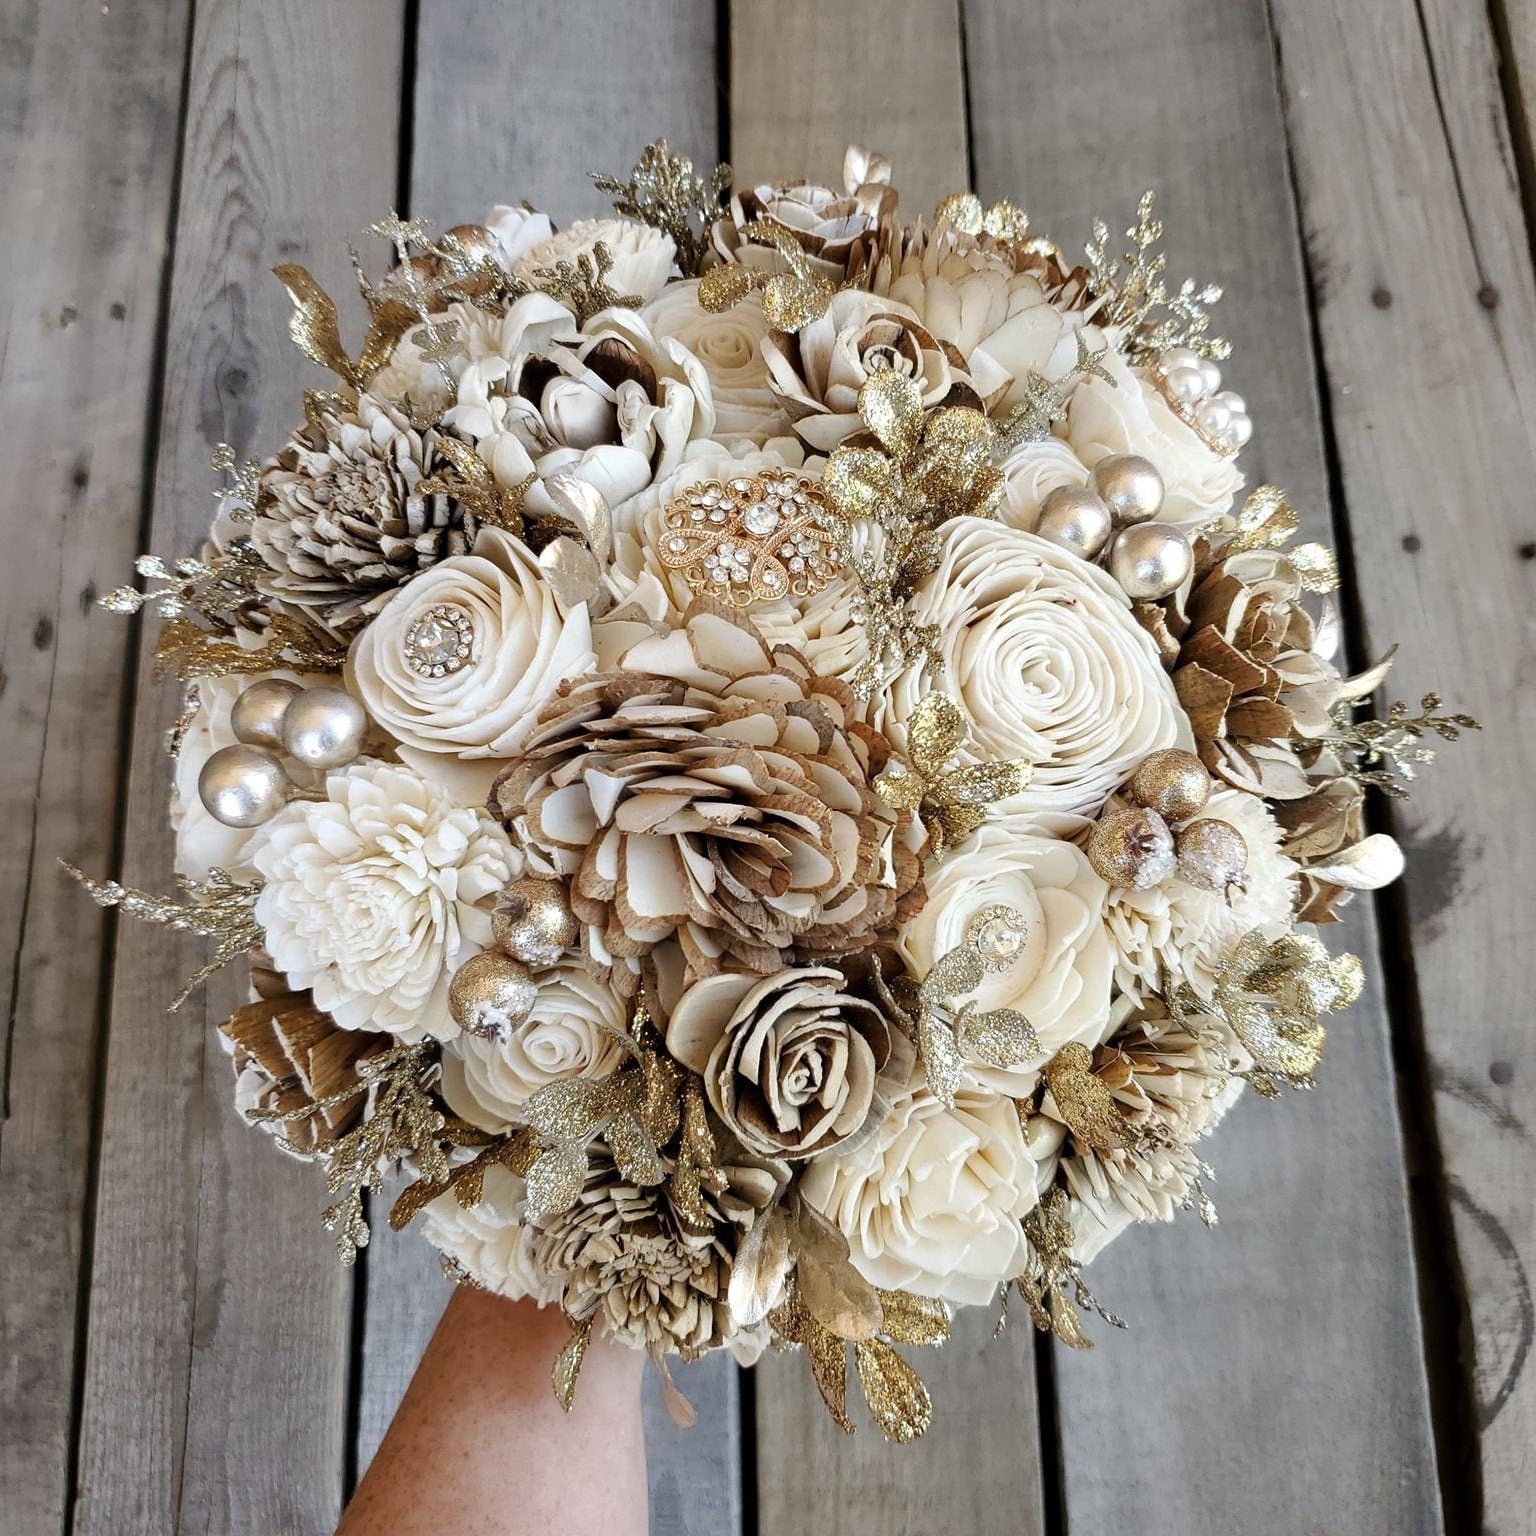 Gold Brooch and Glitter Sola Wood Flower Bouquet with Cream and Natural Bark Flowers, Color Options Available